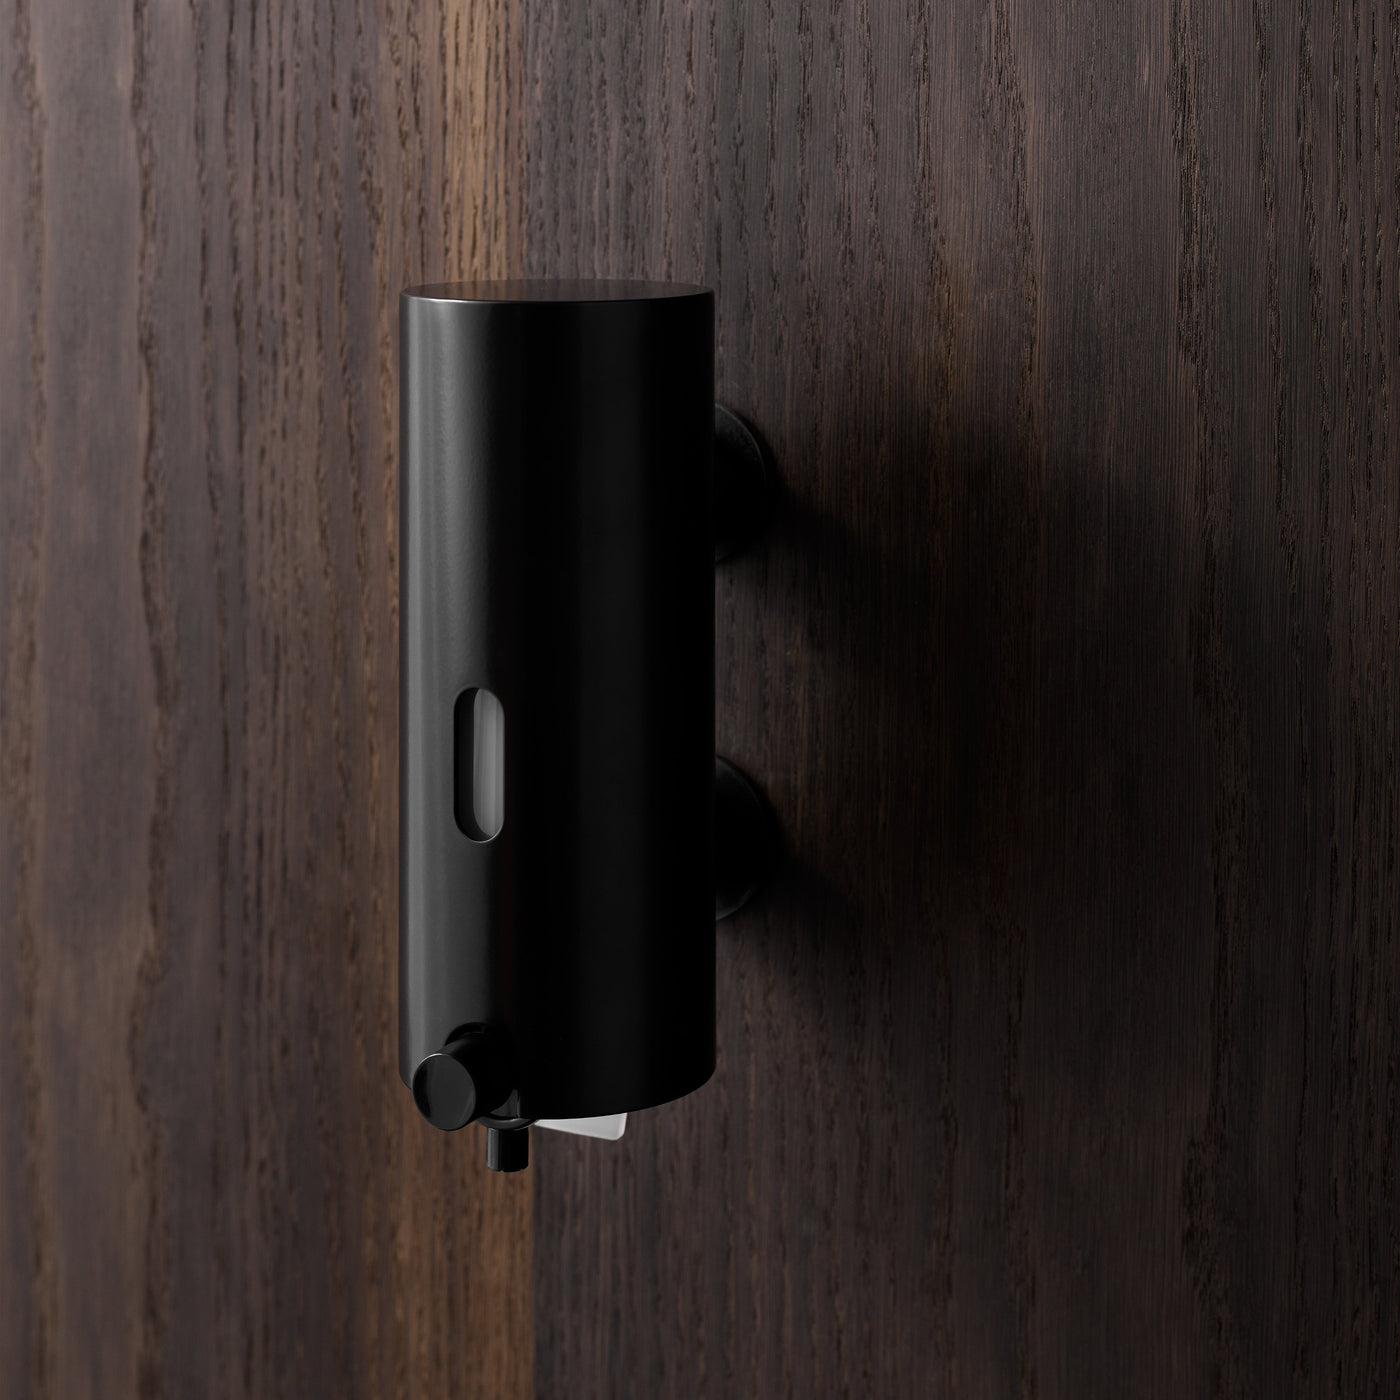 The Knud Soap Dispenser is part of the sanitary line by d line and is available for residential or commercial use.  Shown here in black.